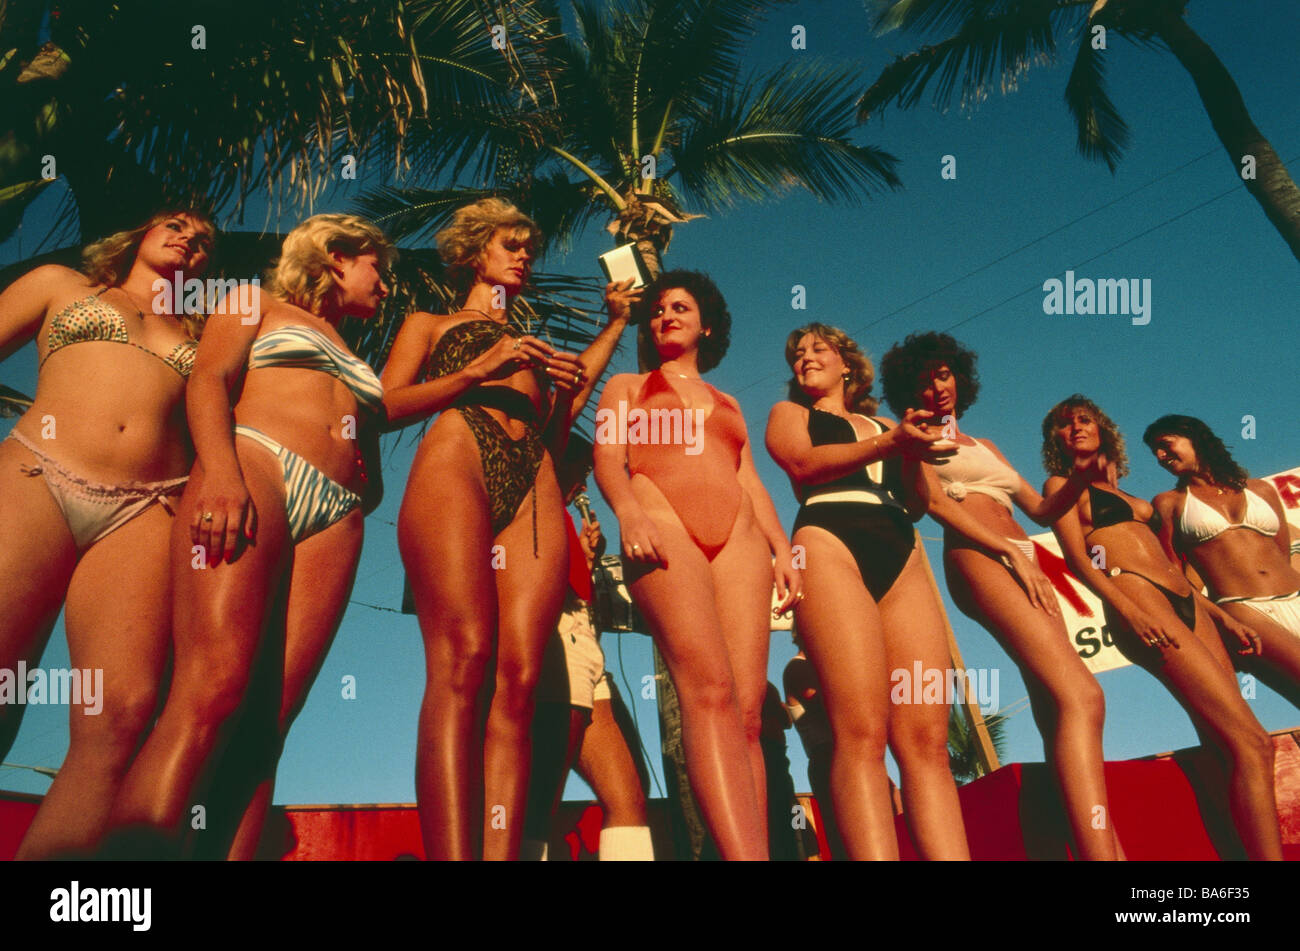 No Swimsuits High Resolution Stock Photography and Images - Alamy